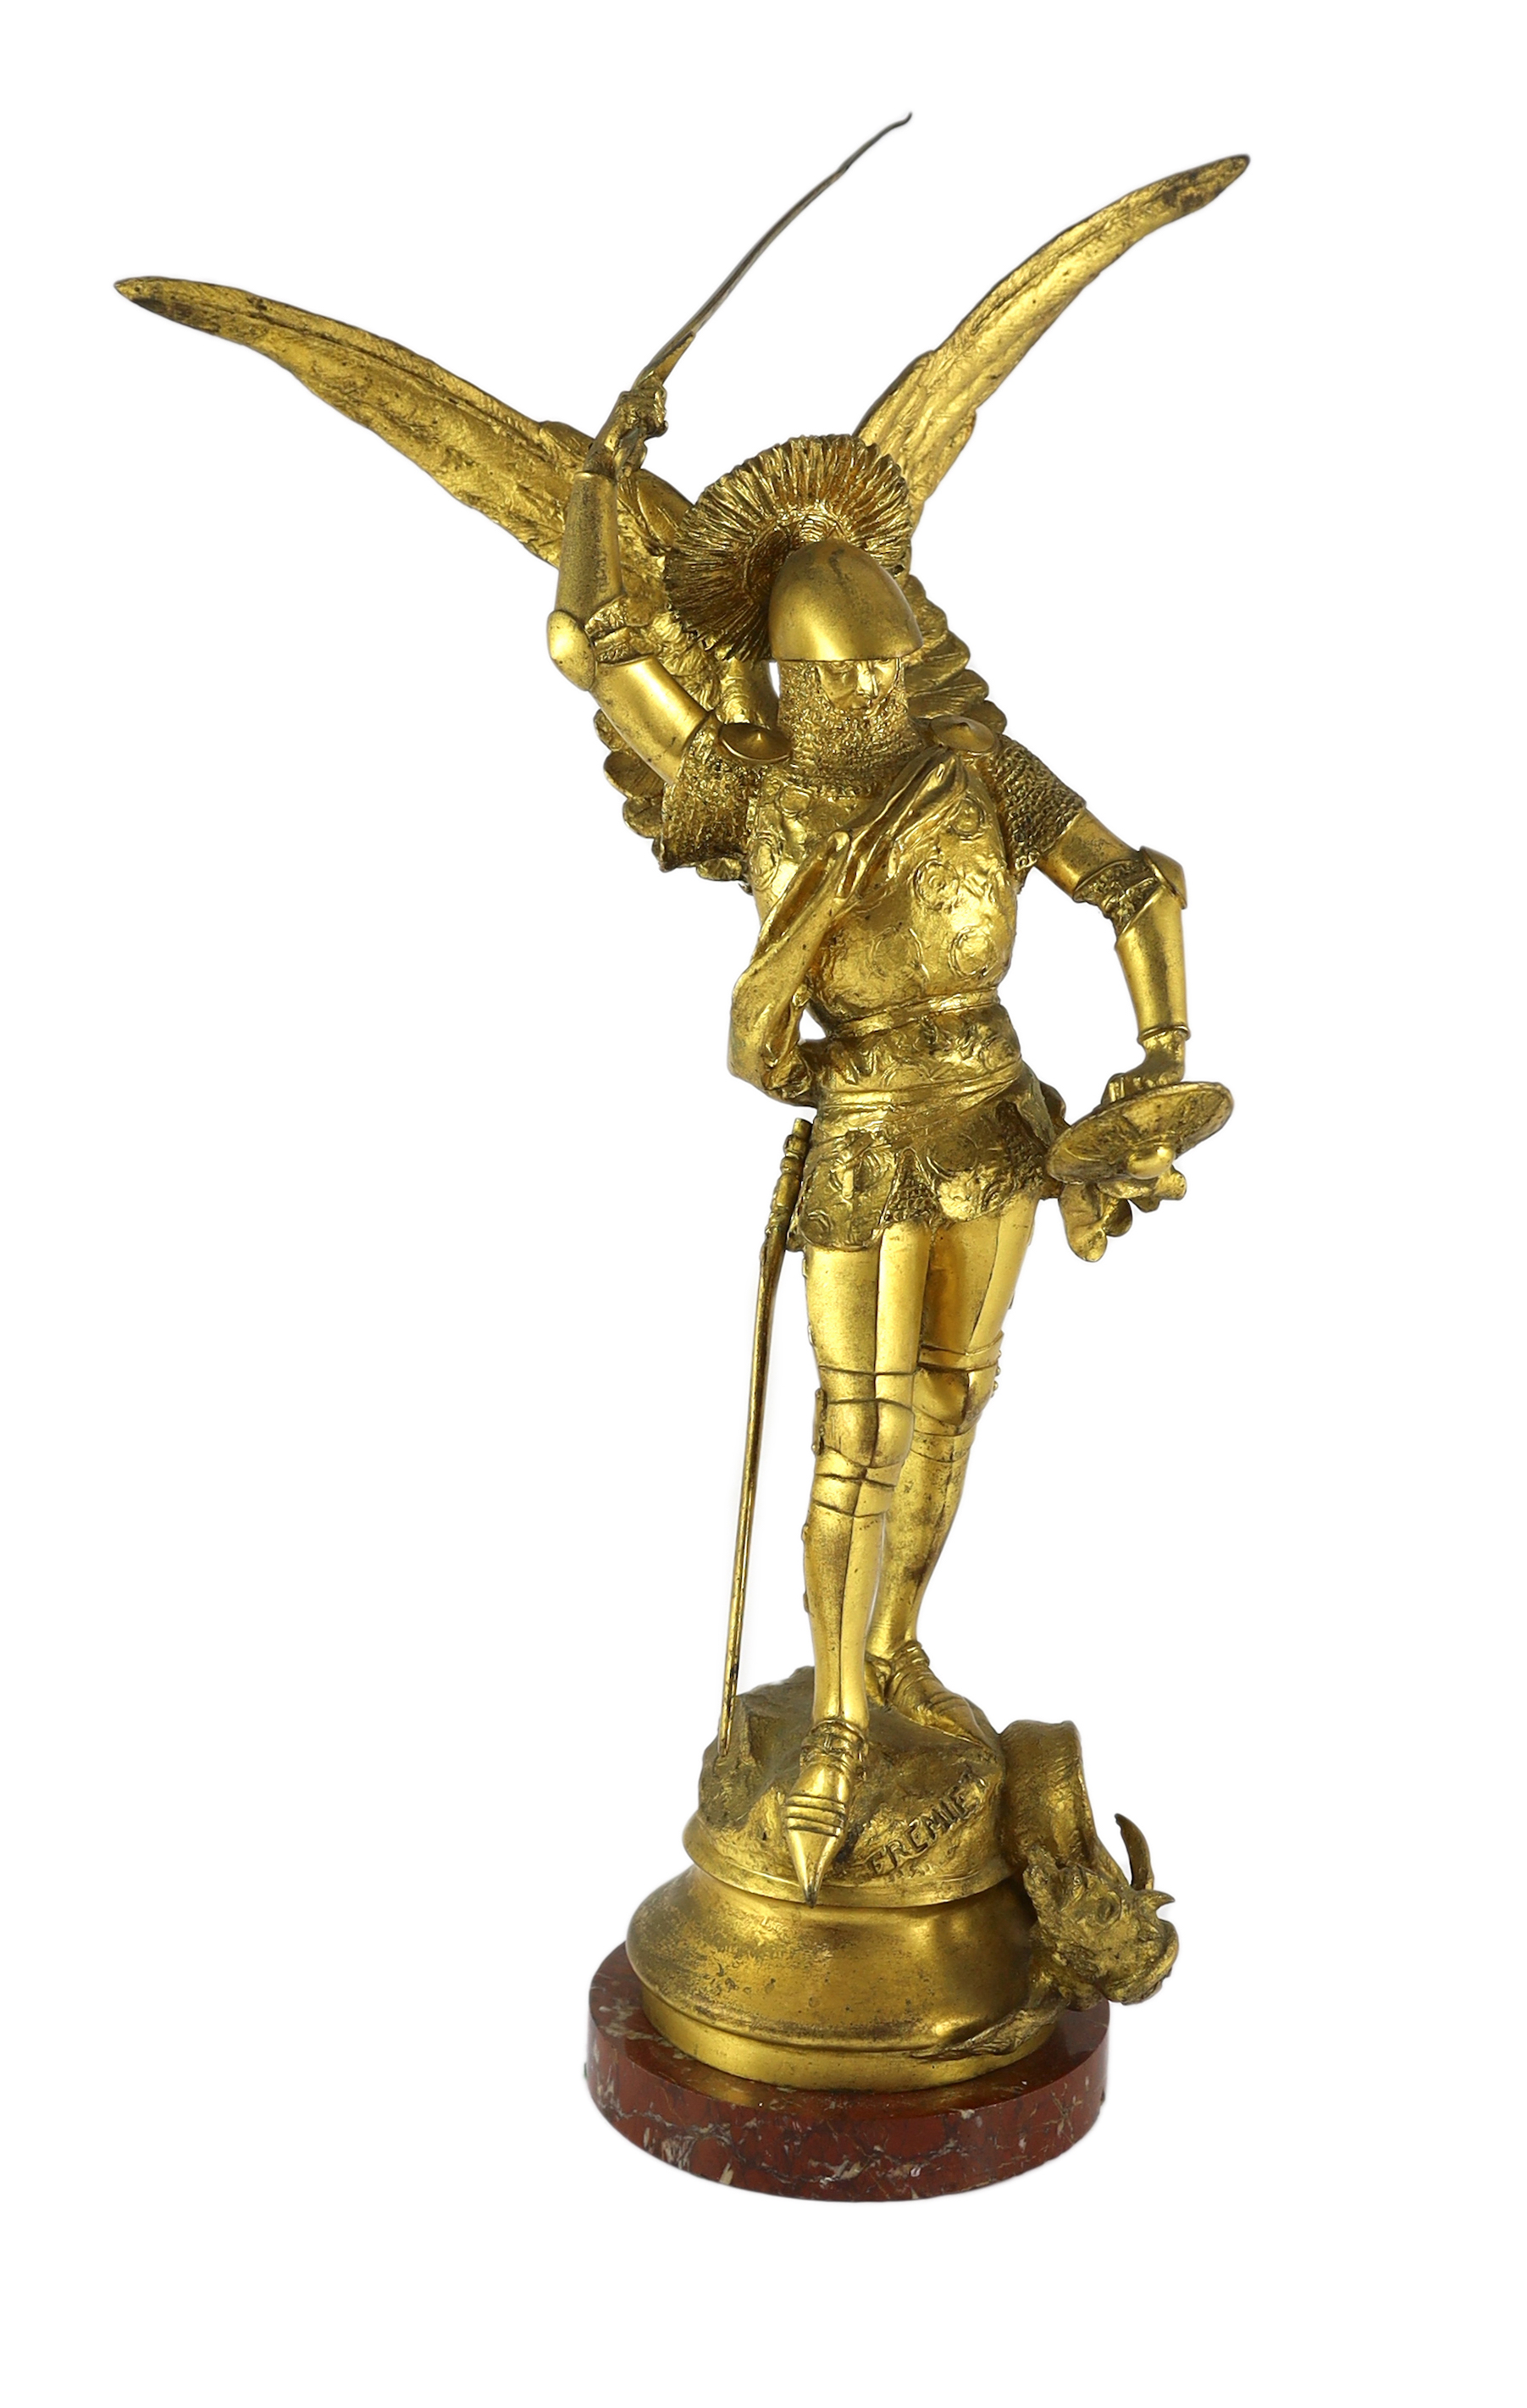 Emmanuel Fremiet (French, 1824-1910). A gilt patinated bronze, St Michael and the dragon, 34cm wide, 56cm high